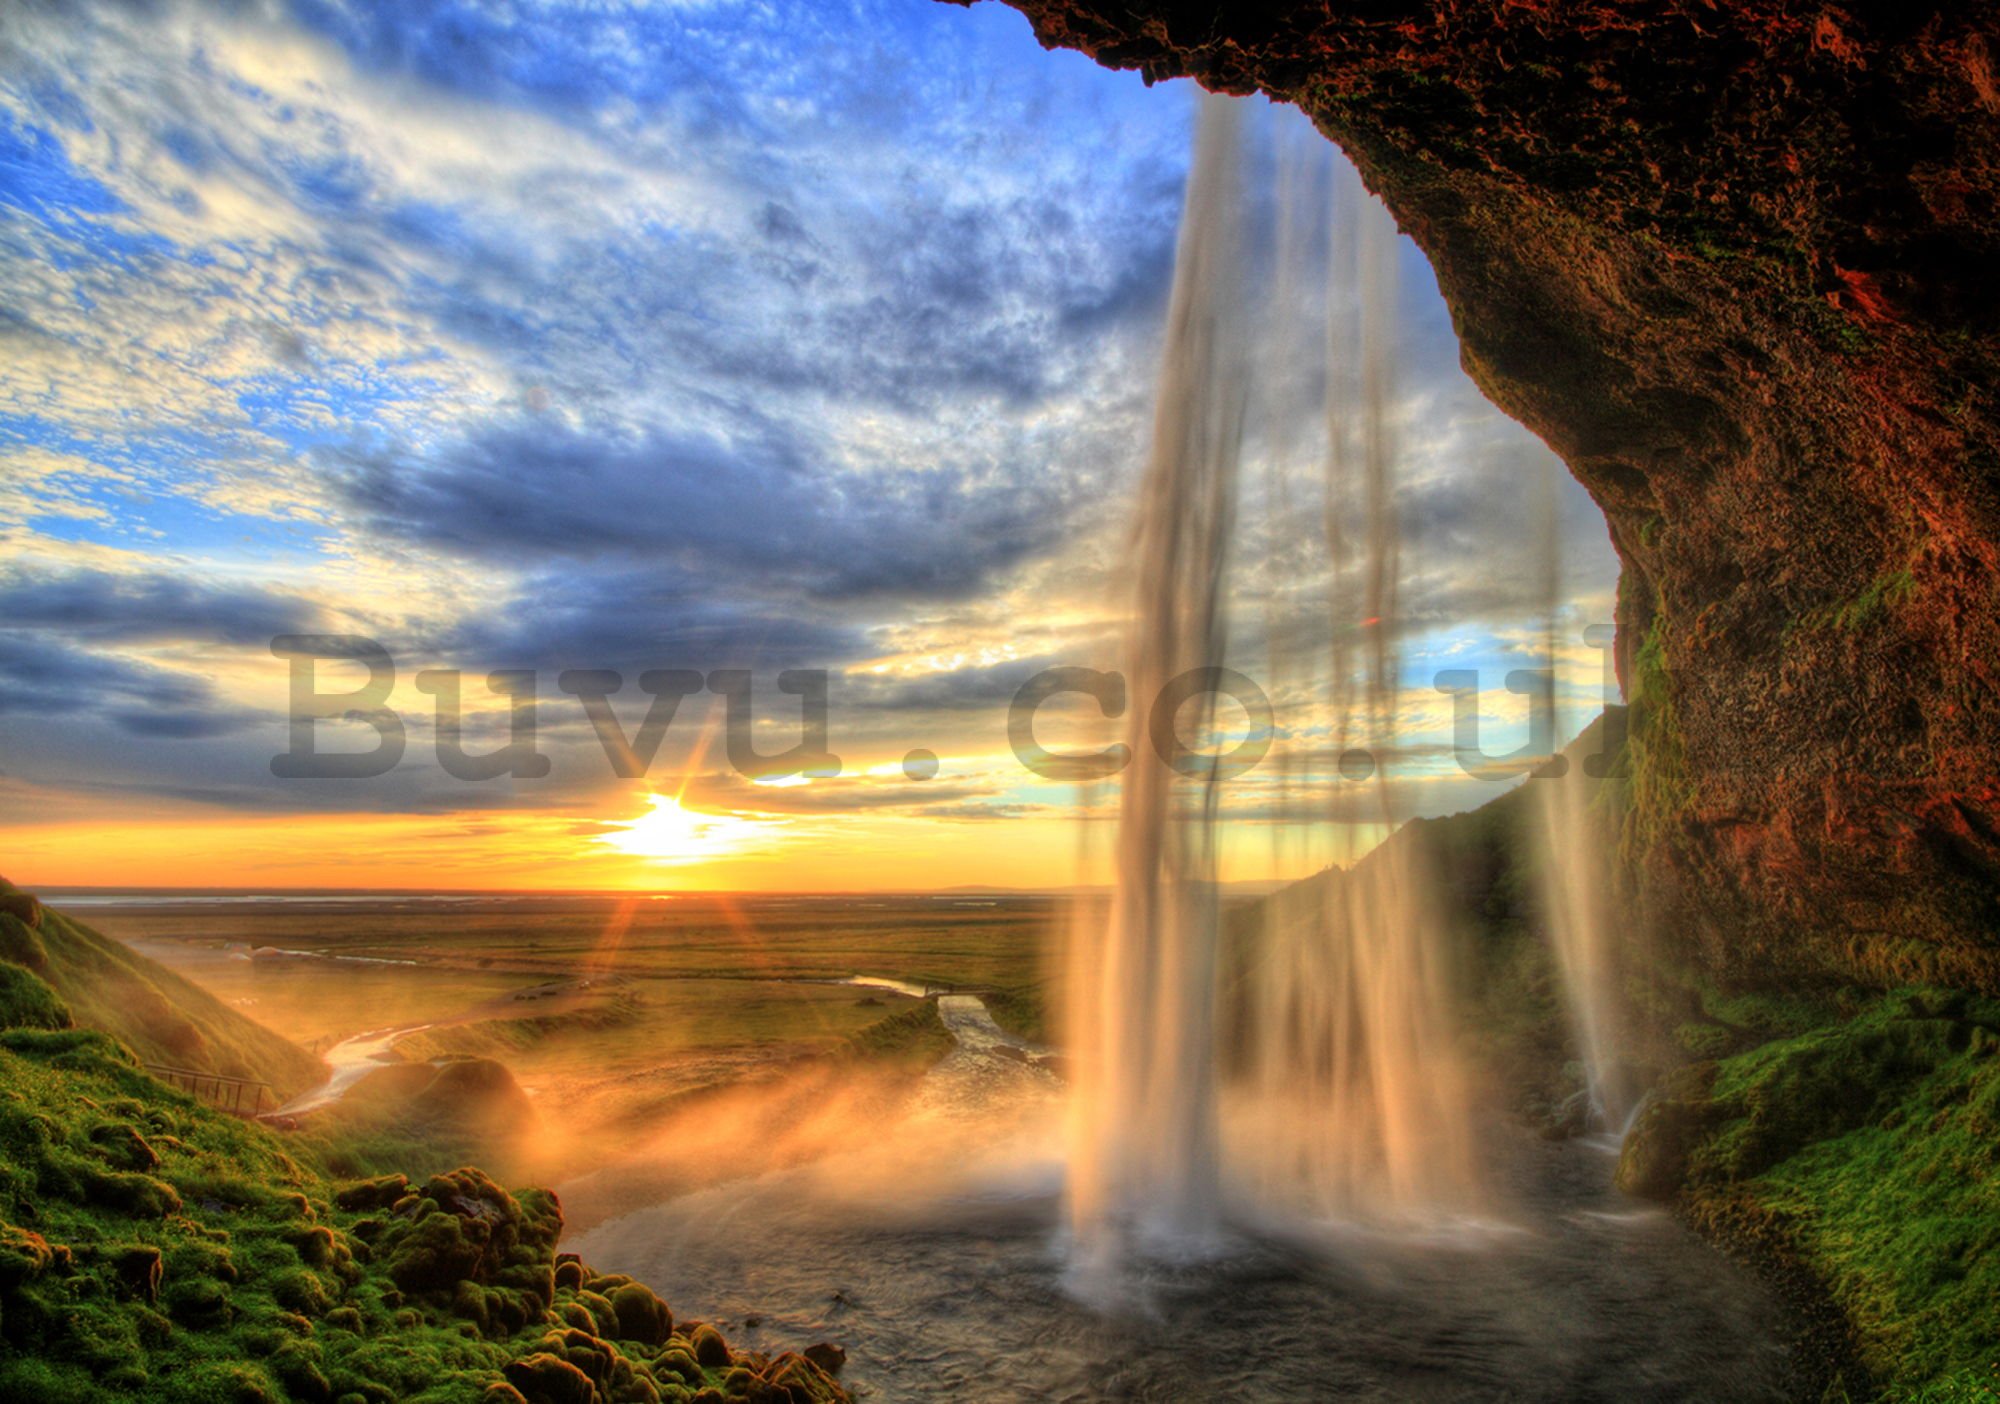 Wall mural: Waterfall at sunset - 104x152,5 cm